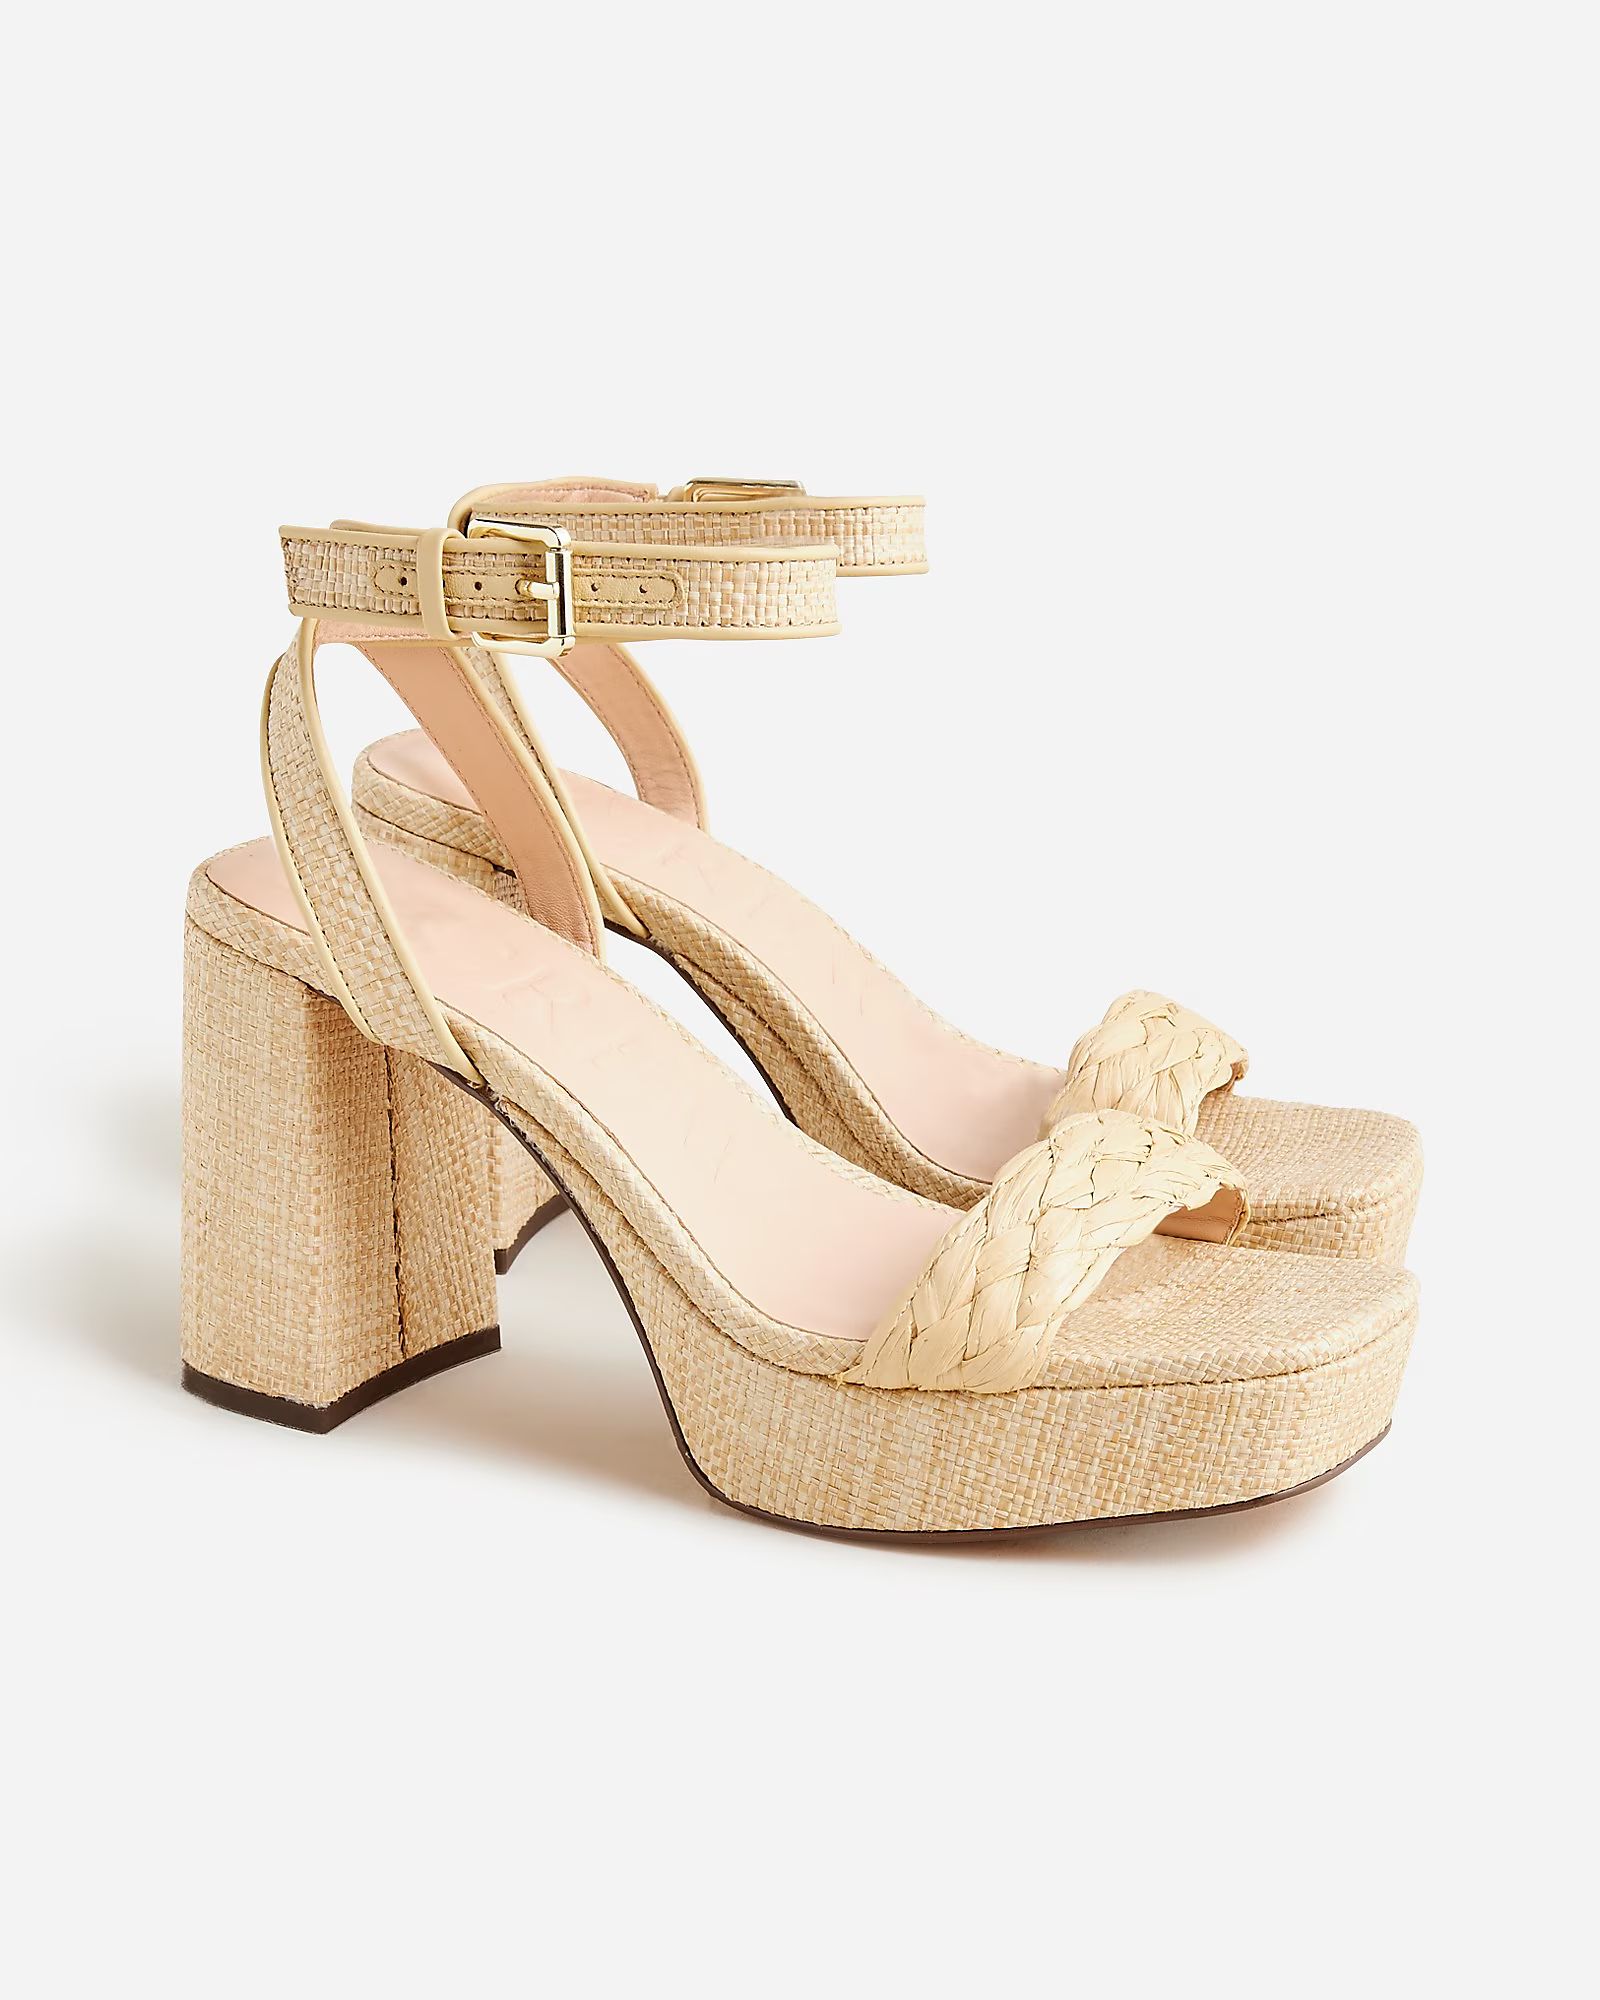 newAnkle-strap platform heels in faux raffia$298.0030% off full price with code SHOP30Weathered S... | J.Crew US